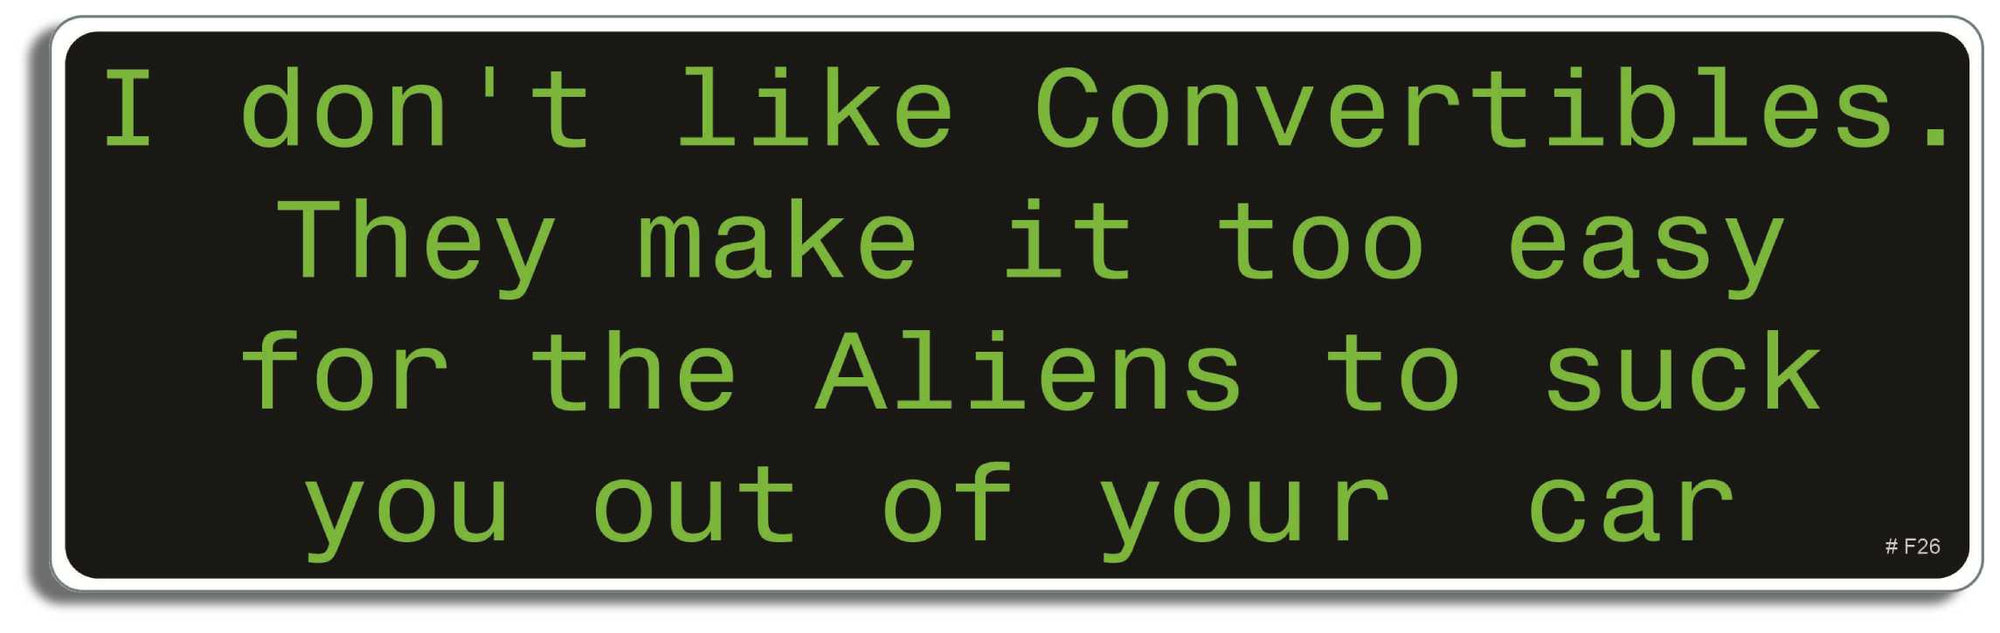 I don't like convertibles, they make it too easy for the aliens to suck you out of your car. - 3" x 10" Bumper Sticker--Car Magnet- -  Decal Bumper Sticker-funny Bumper Sticker Car Magnet I don't like convertibles, they make-  Decal for carsalien, convertable